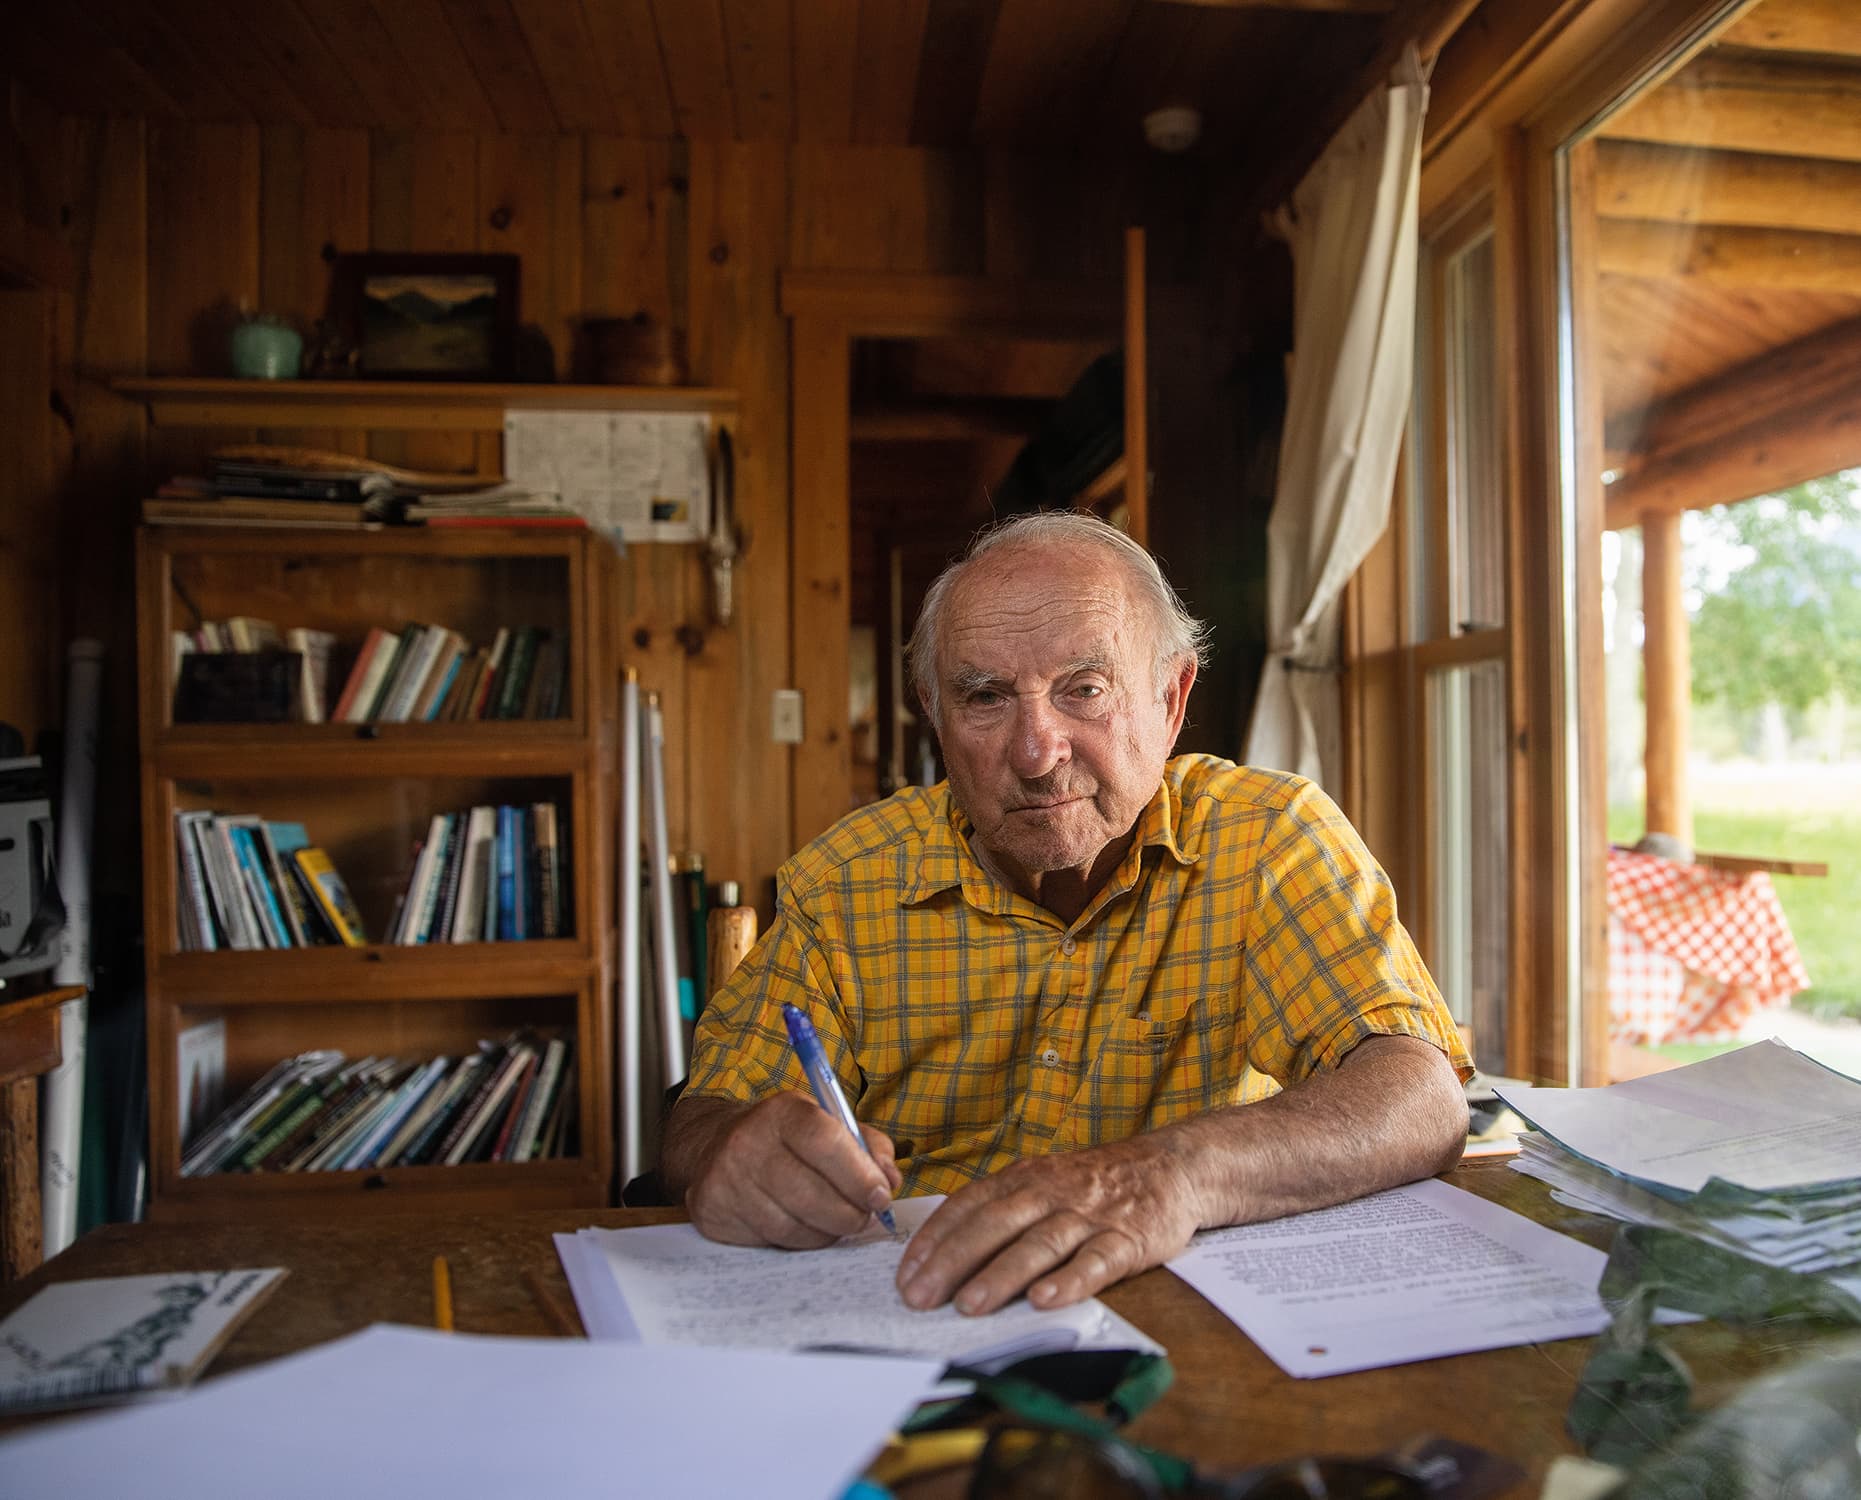 Patagonia Founder to receive Outstanding Achievement Award at The Fashion Awards 2022